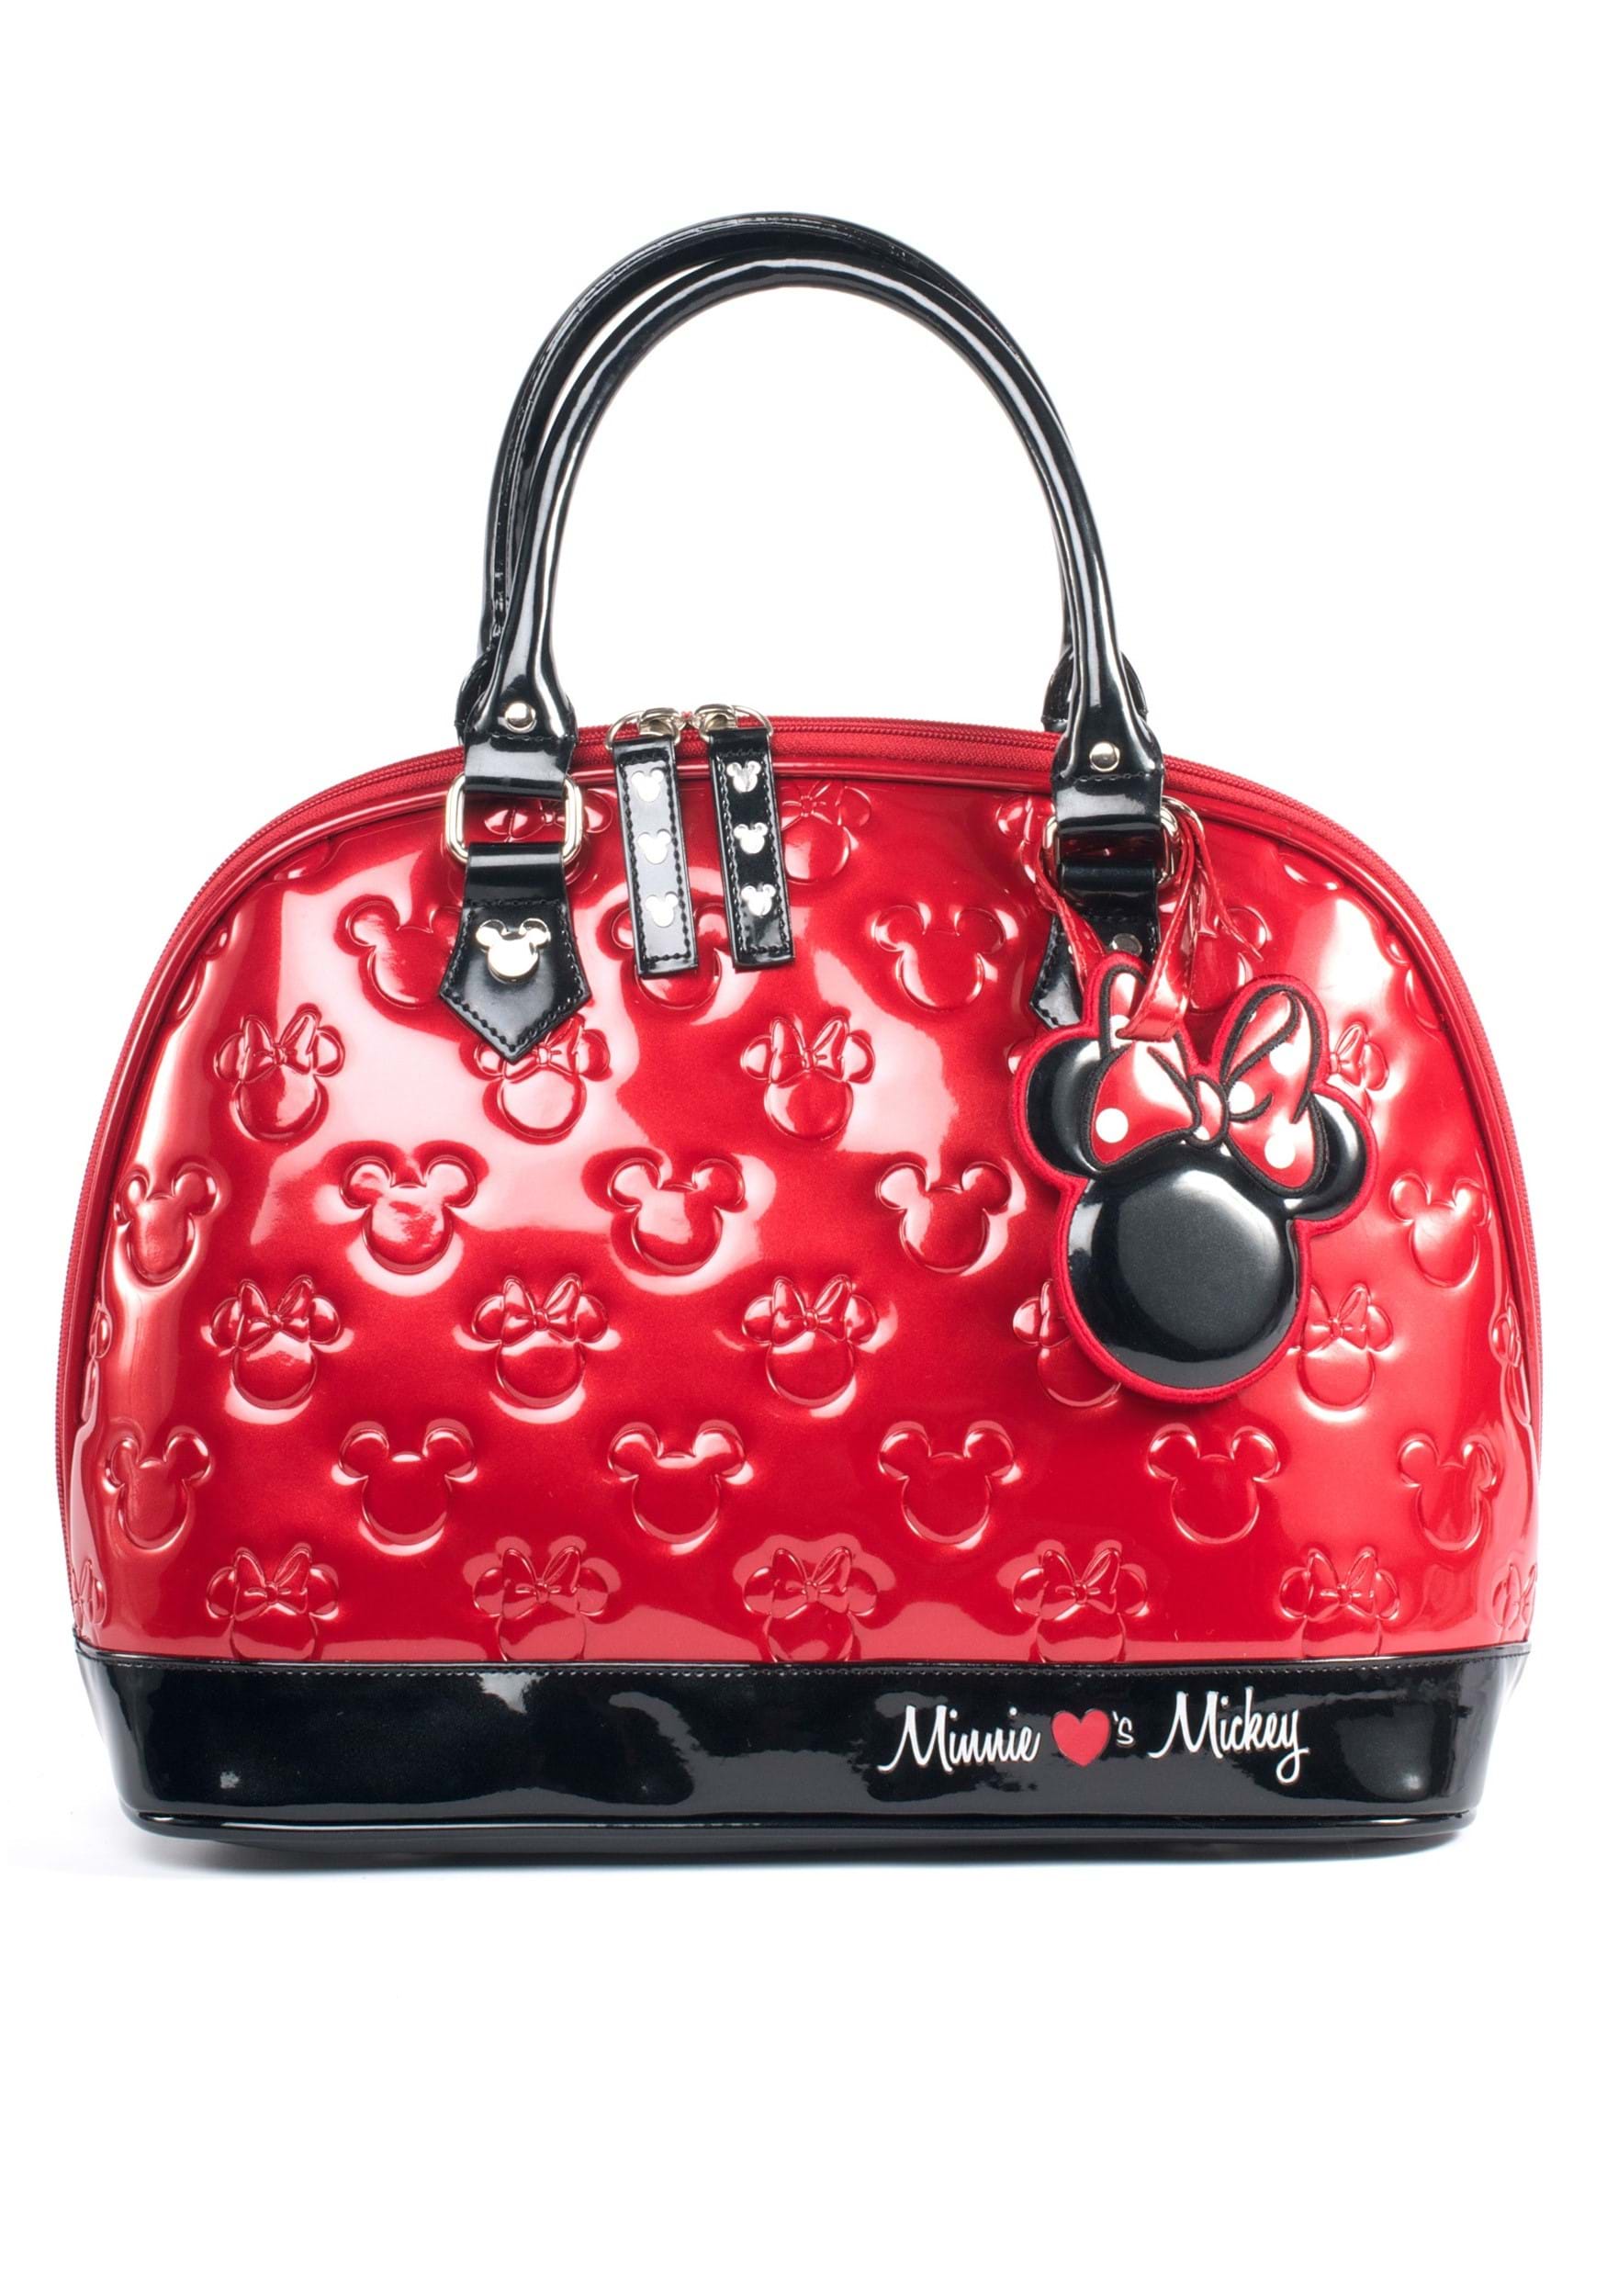 https://images.fun.com/products/24505/2-1-178446/mickey-and-minnie-red-and-black-patent-embossed-ba-alt-6.jpg